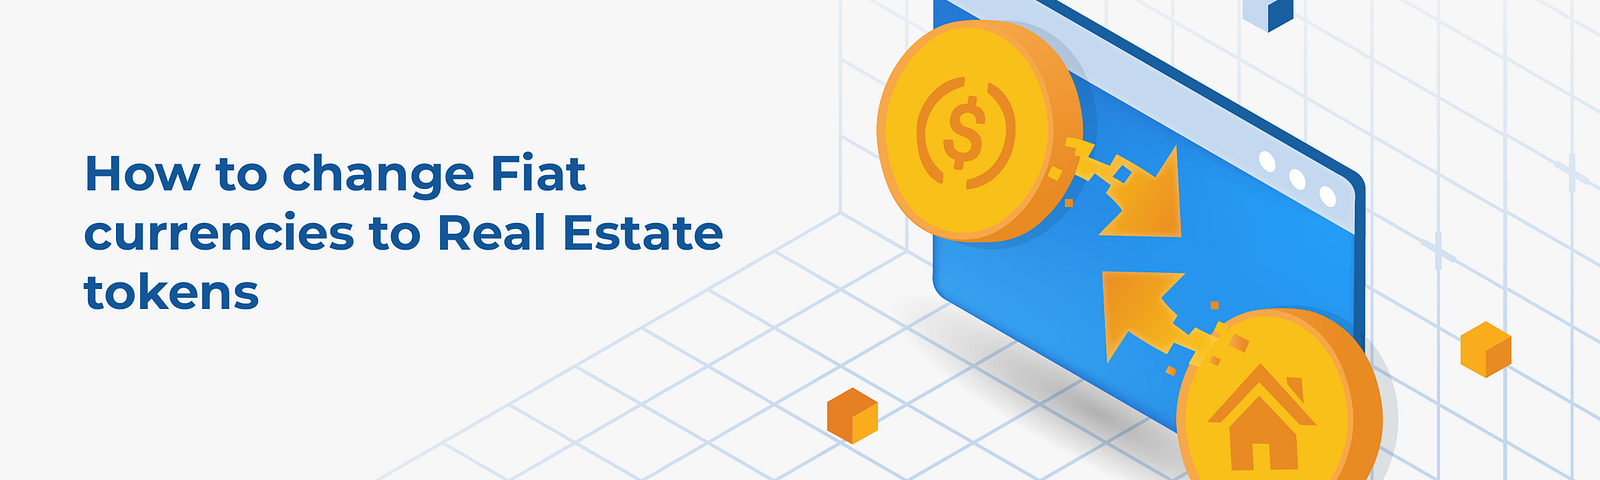 How to change Fiat currencies to Real Estate tokens